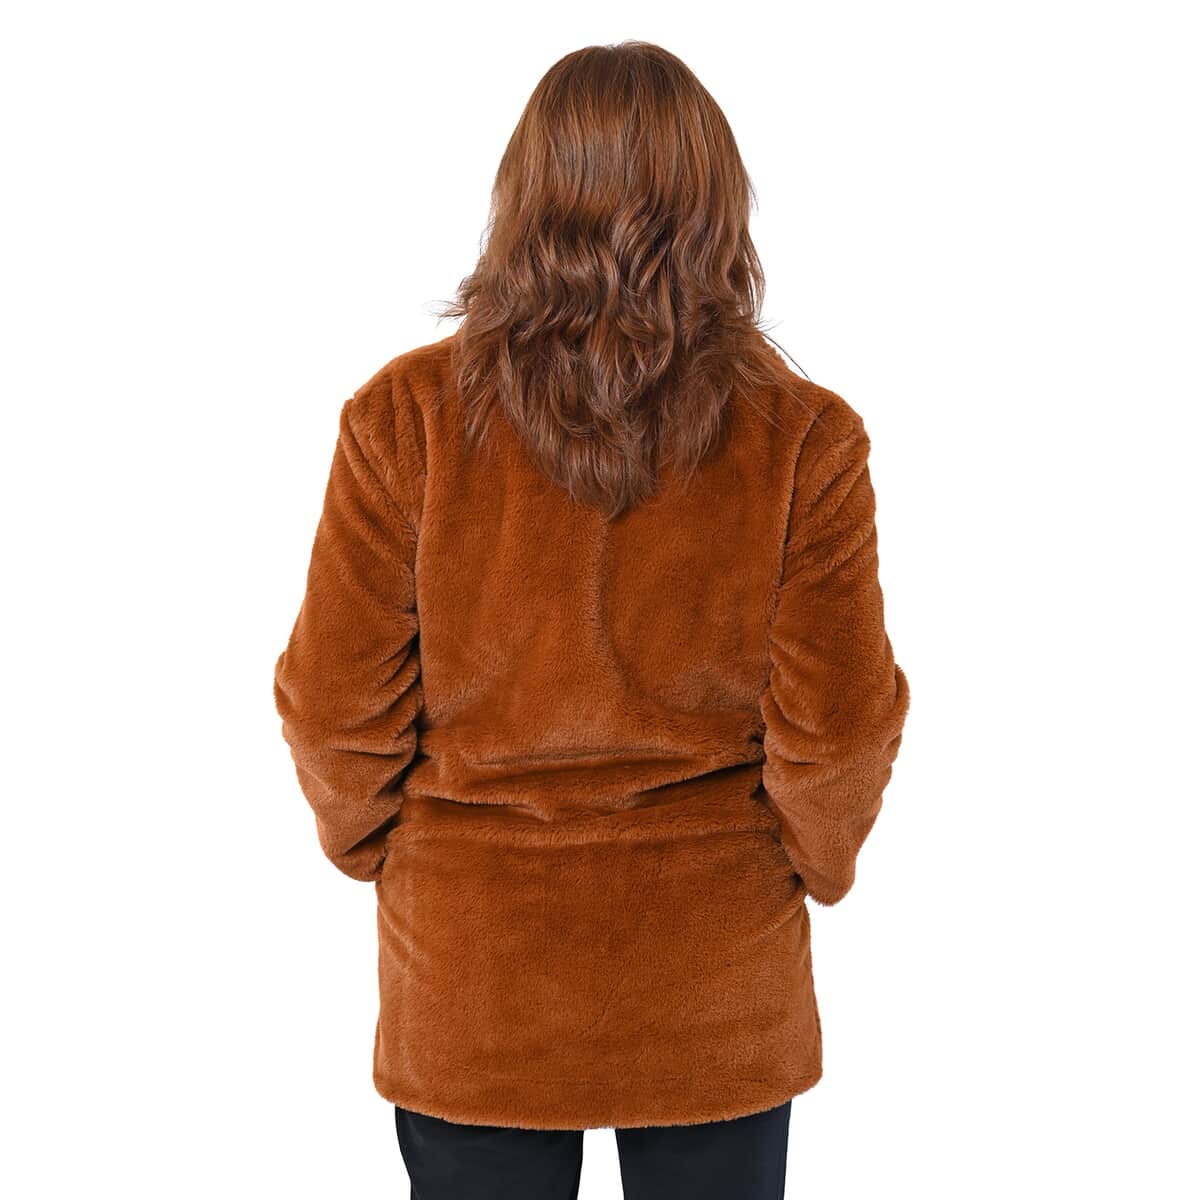 Passage Solid Tan Faux Fur Oversized Coat For women - XL image number 1